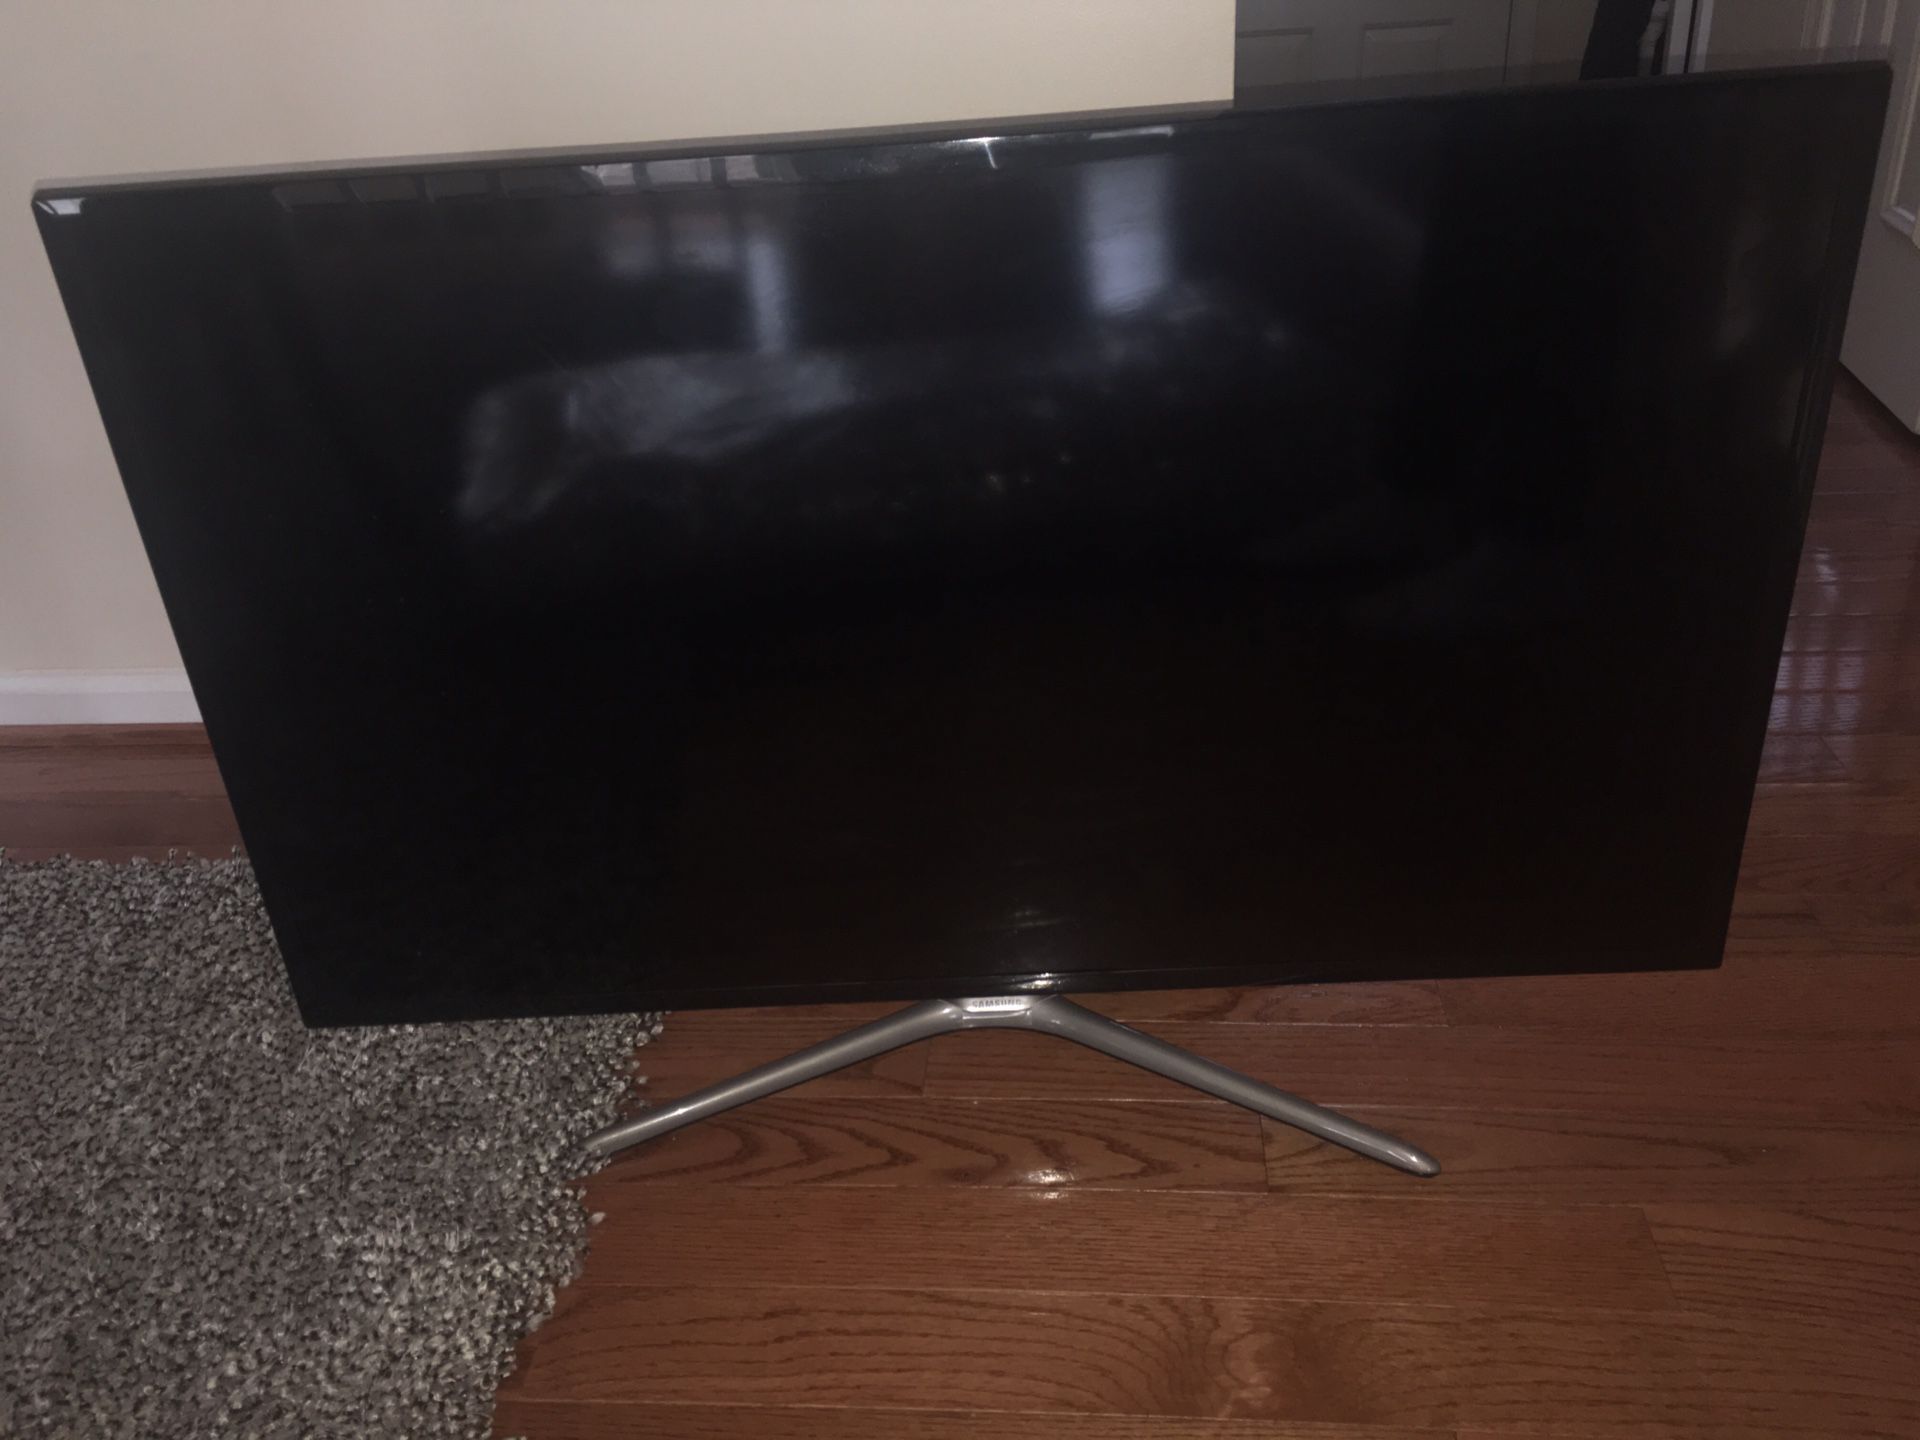 Samsung 42” Smart Tv ( For parts only. No picture but has sound.)